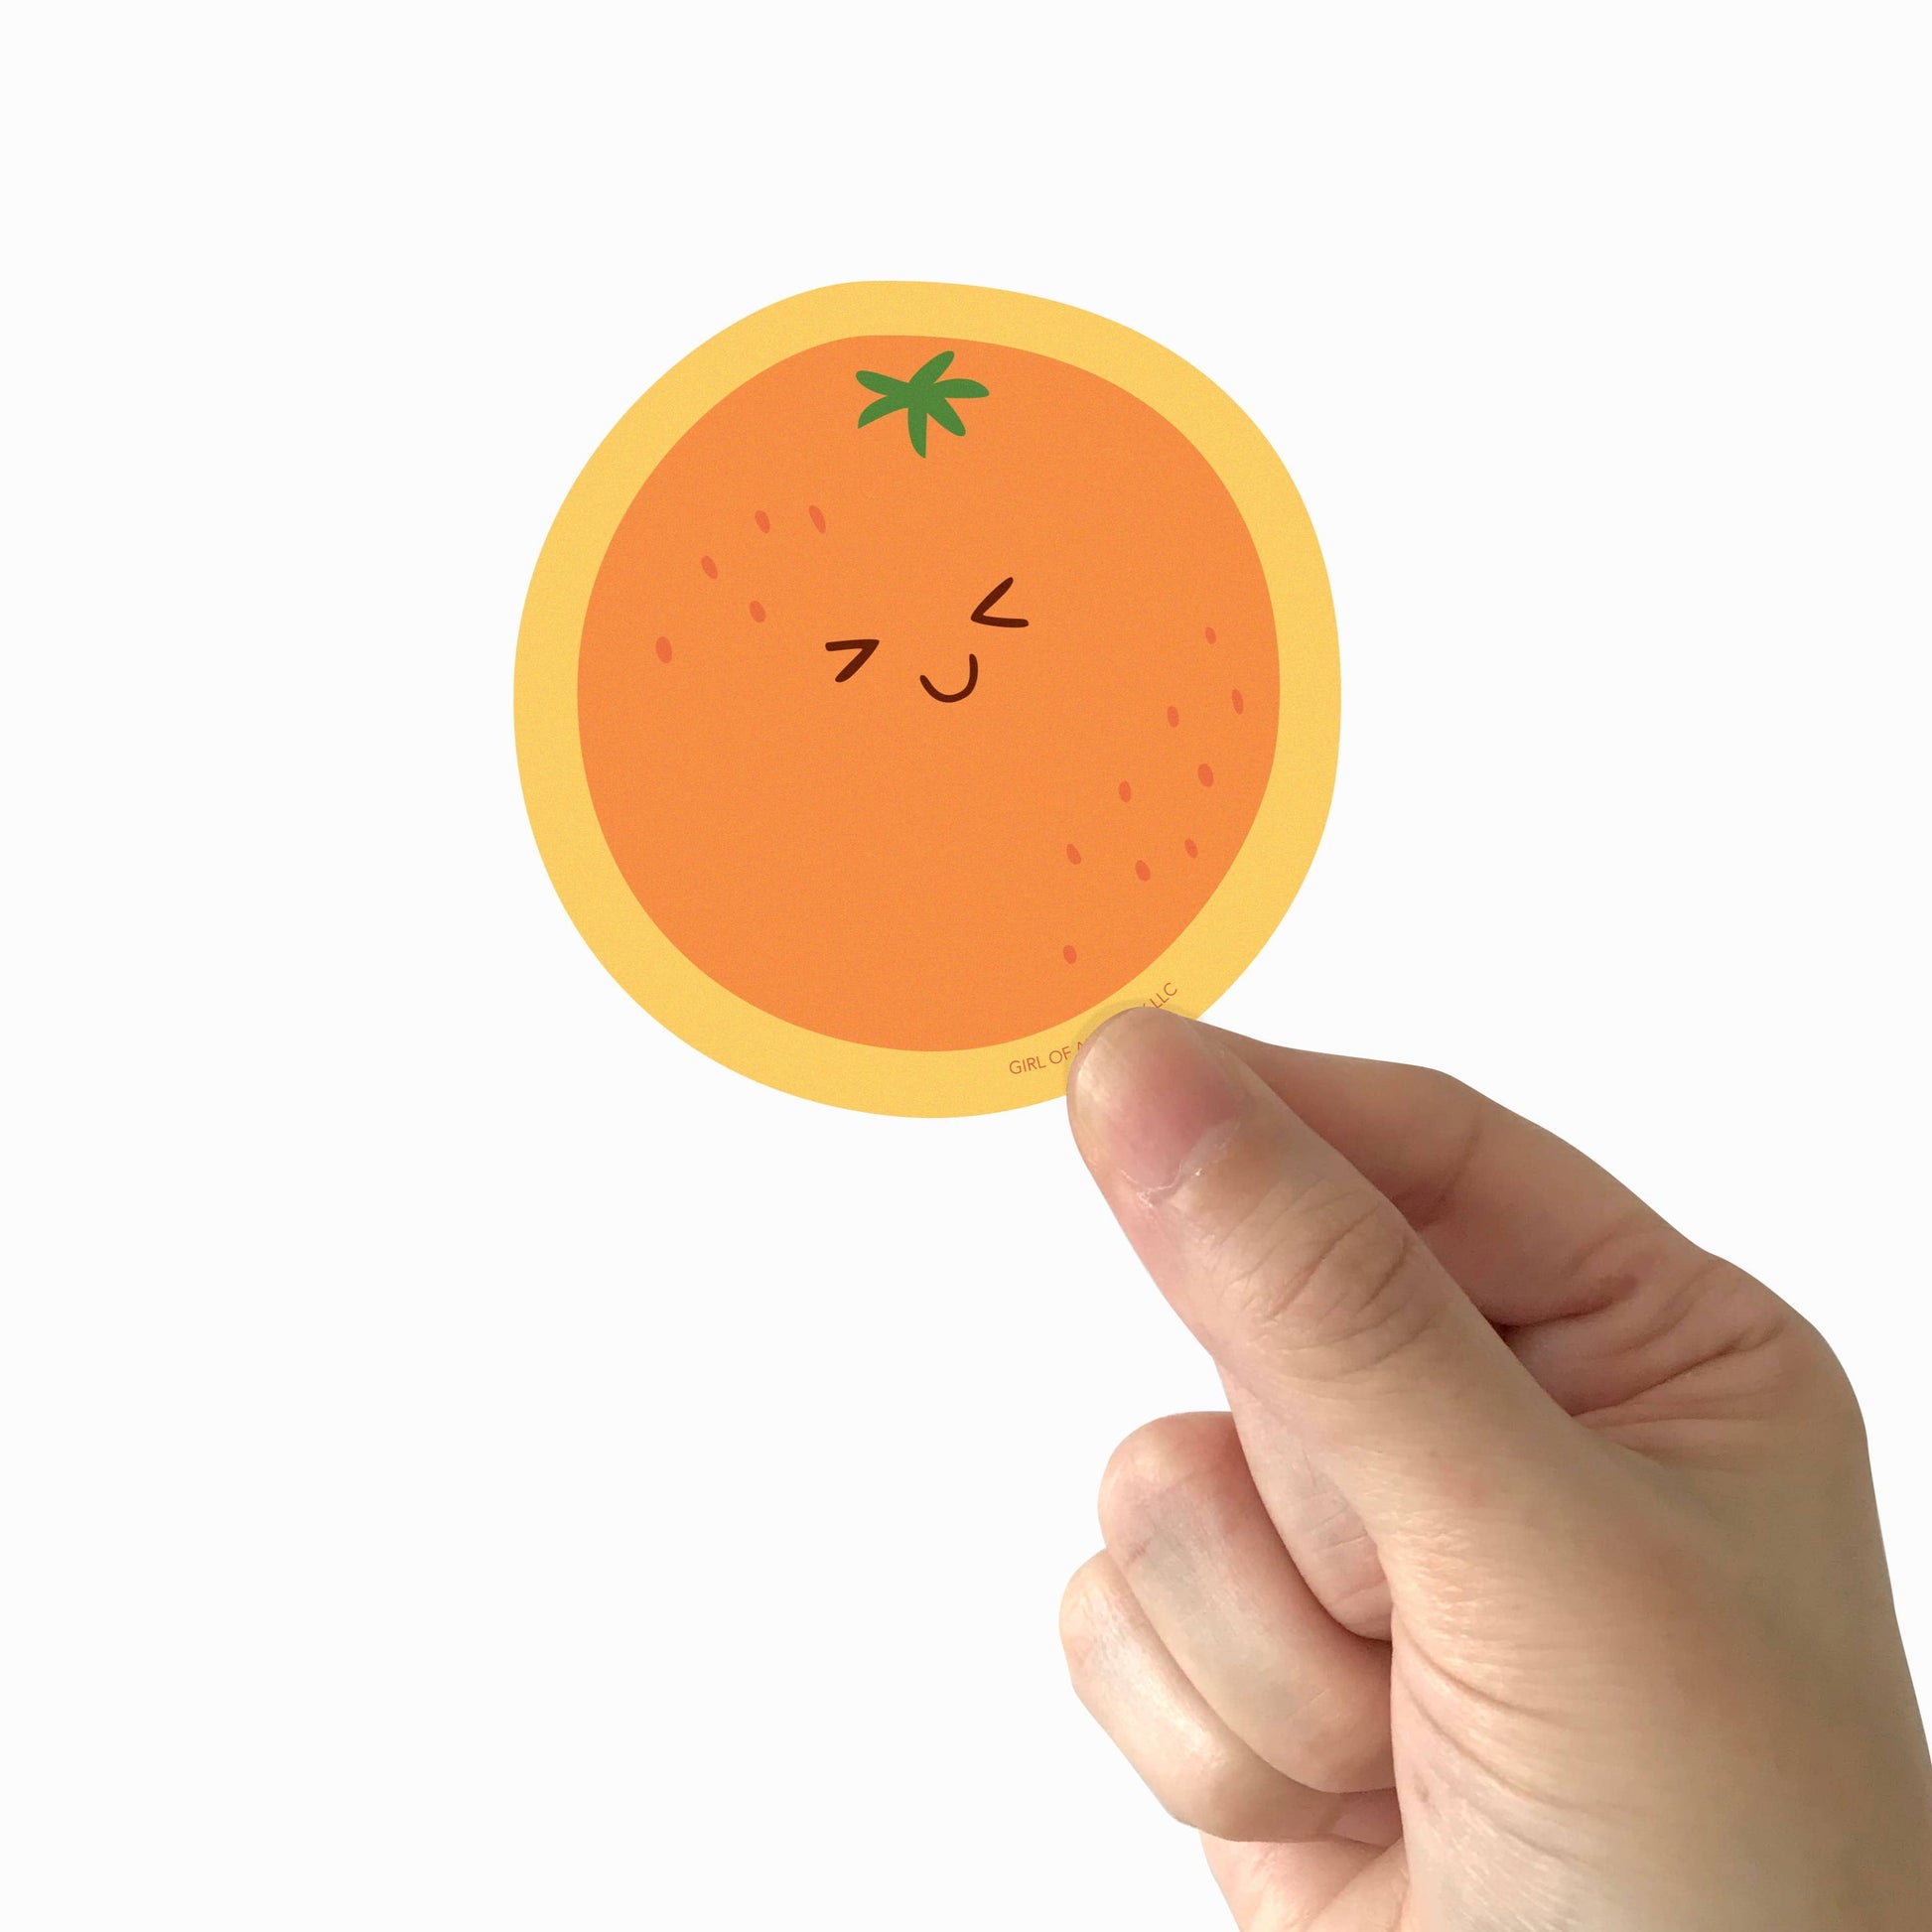 Vinyl sticker of an orange making a cute, smiley face, being held in someone's hand 